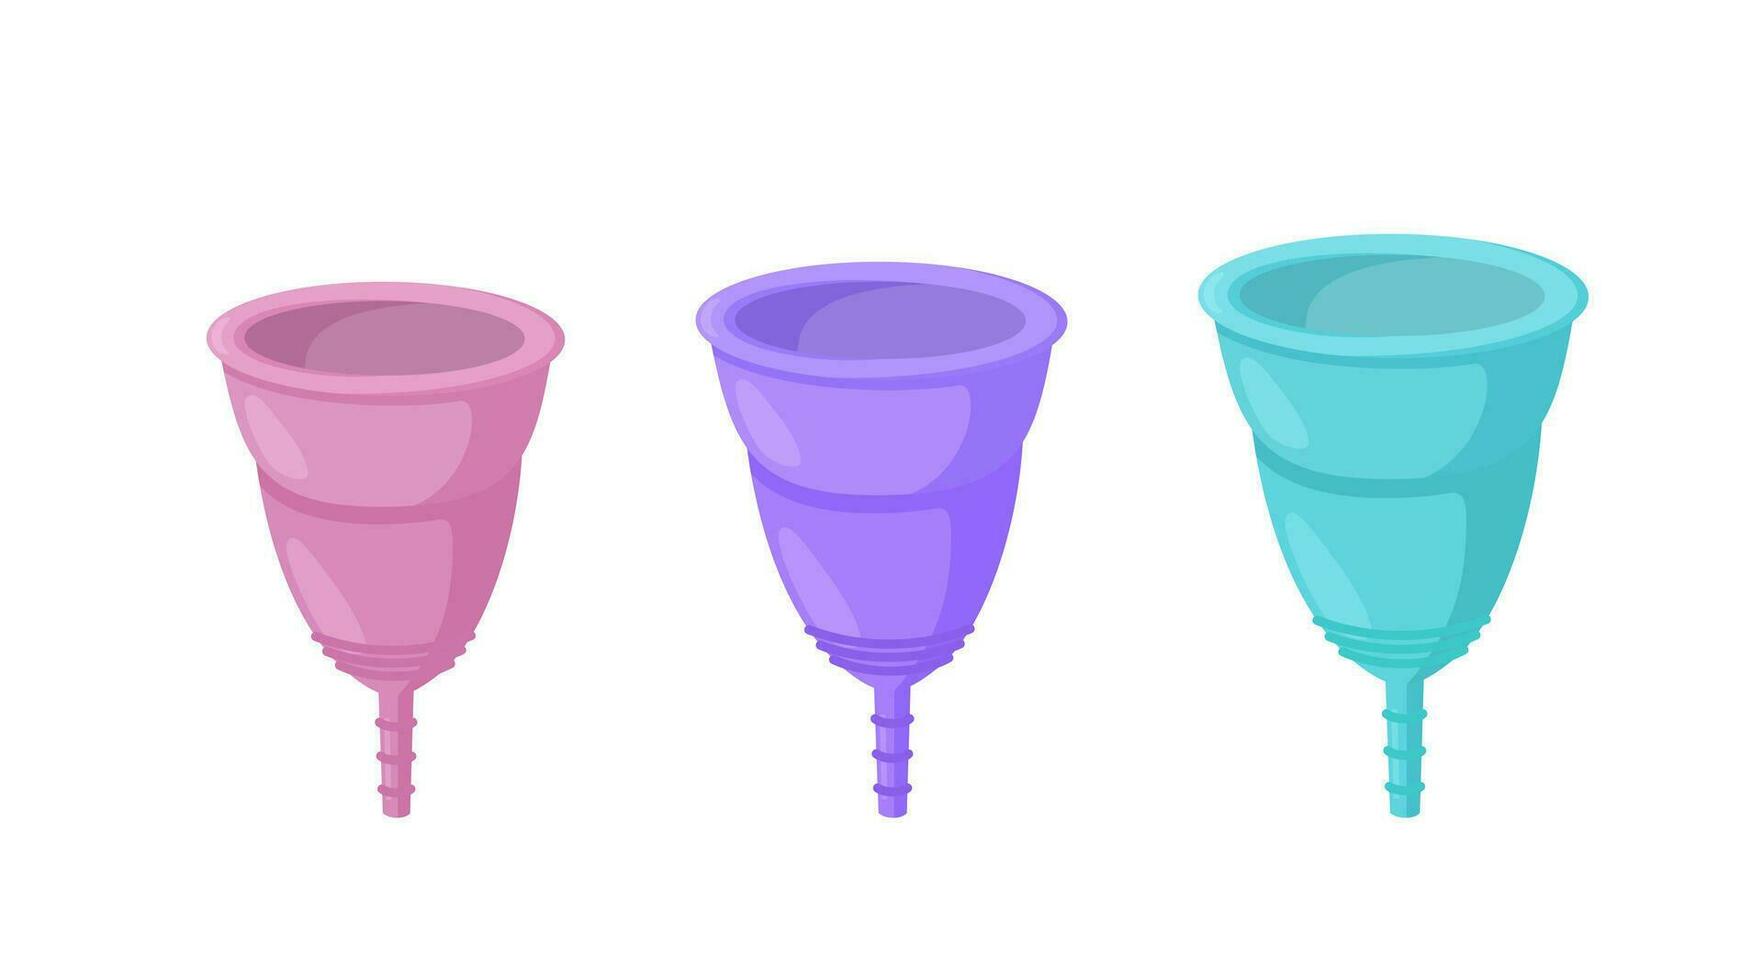 Reusable menstrual cups of defferent sized and colors. Sanitary items for women who tend to reuse and zero waste. Vector illustration